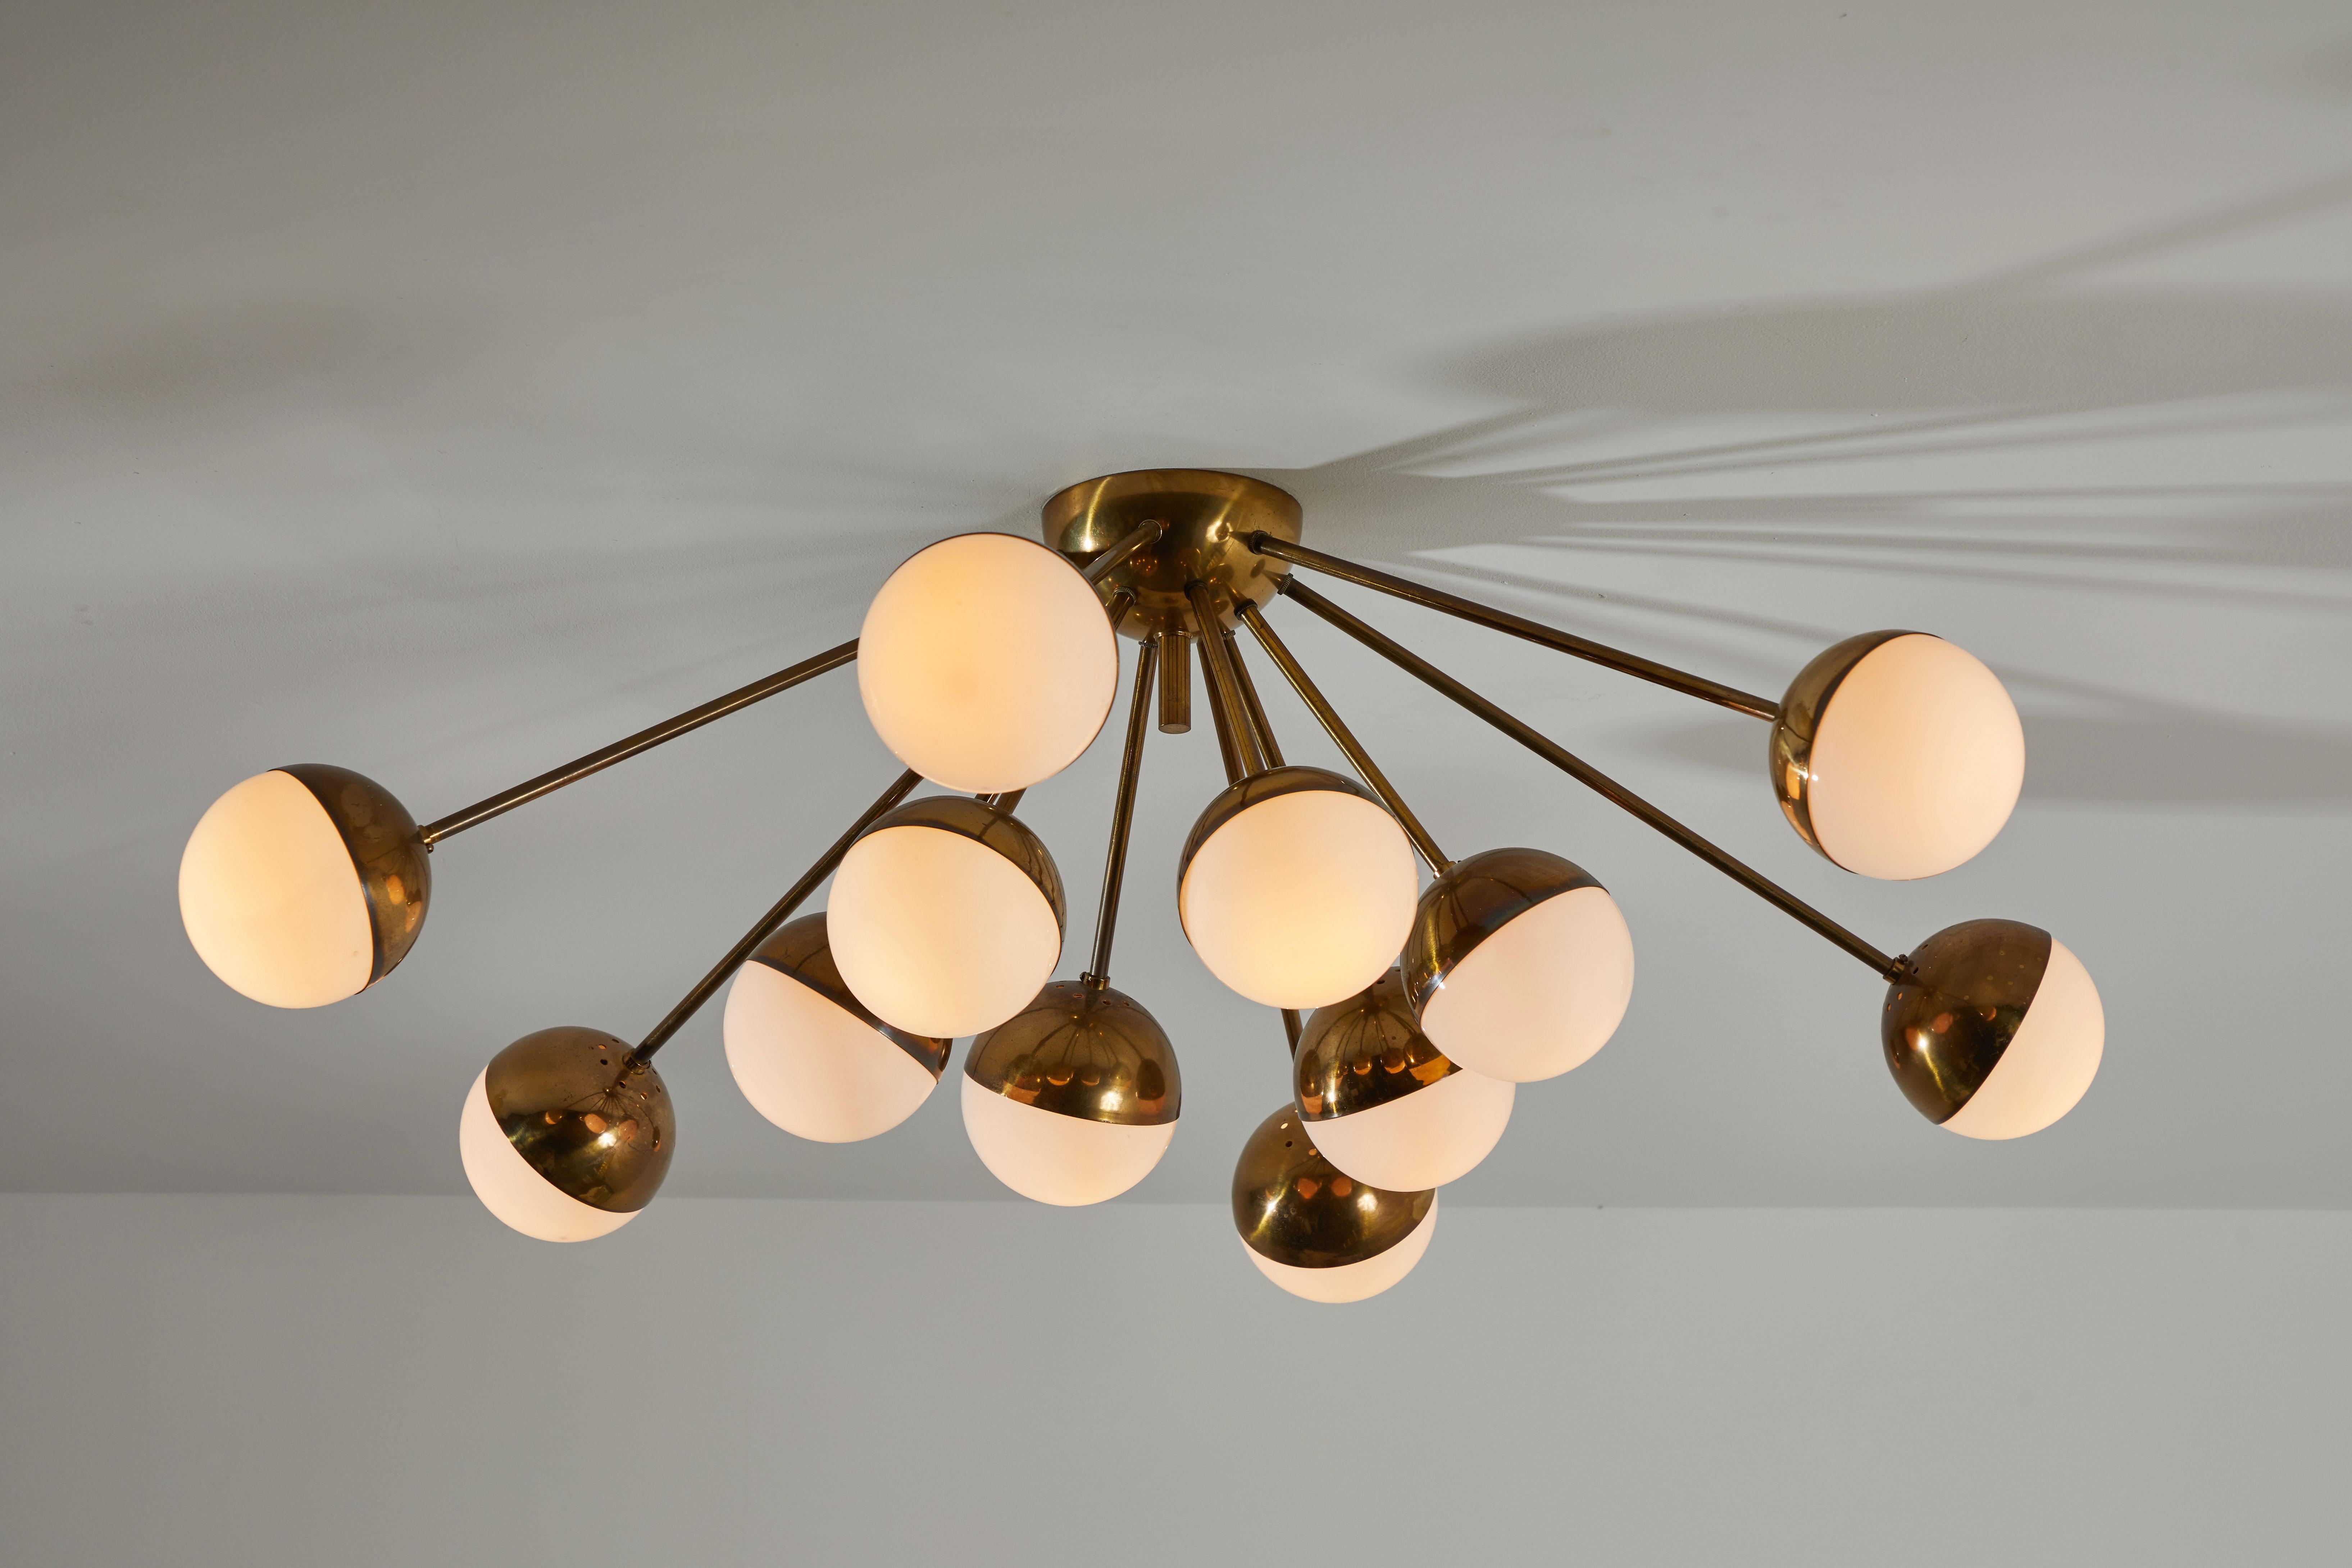 Twelve-arm ceiling light by Stilnovo. Manufactured in Italy, circa 1950s. Brass and brushed satin glass diffusers. Rewired for US junction boxes. Takes twelve E27 European candelabra 40w maximum bulbs.